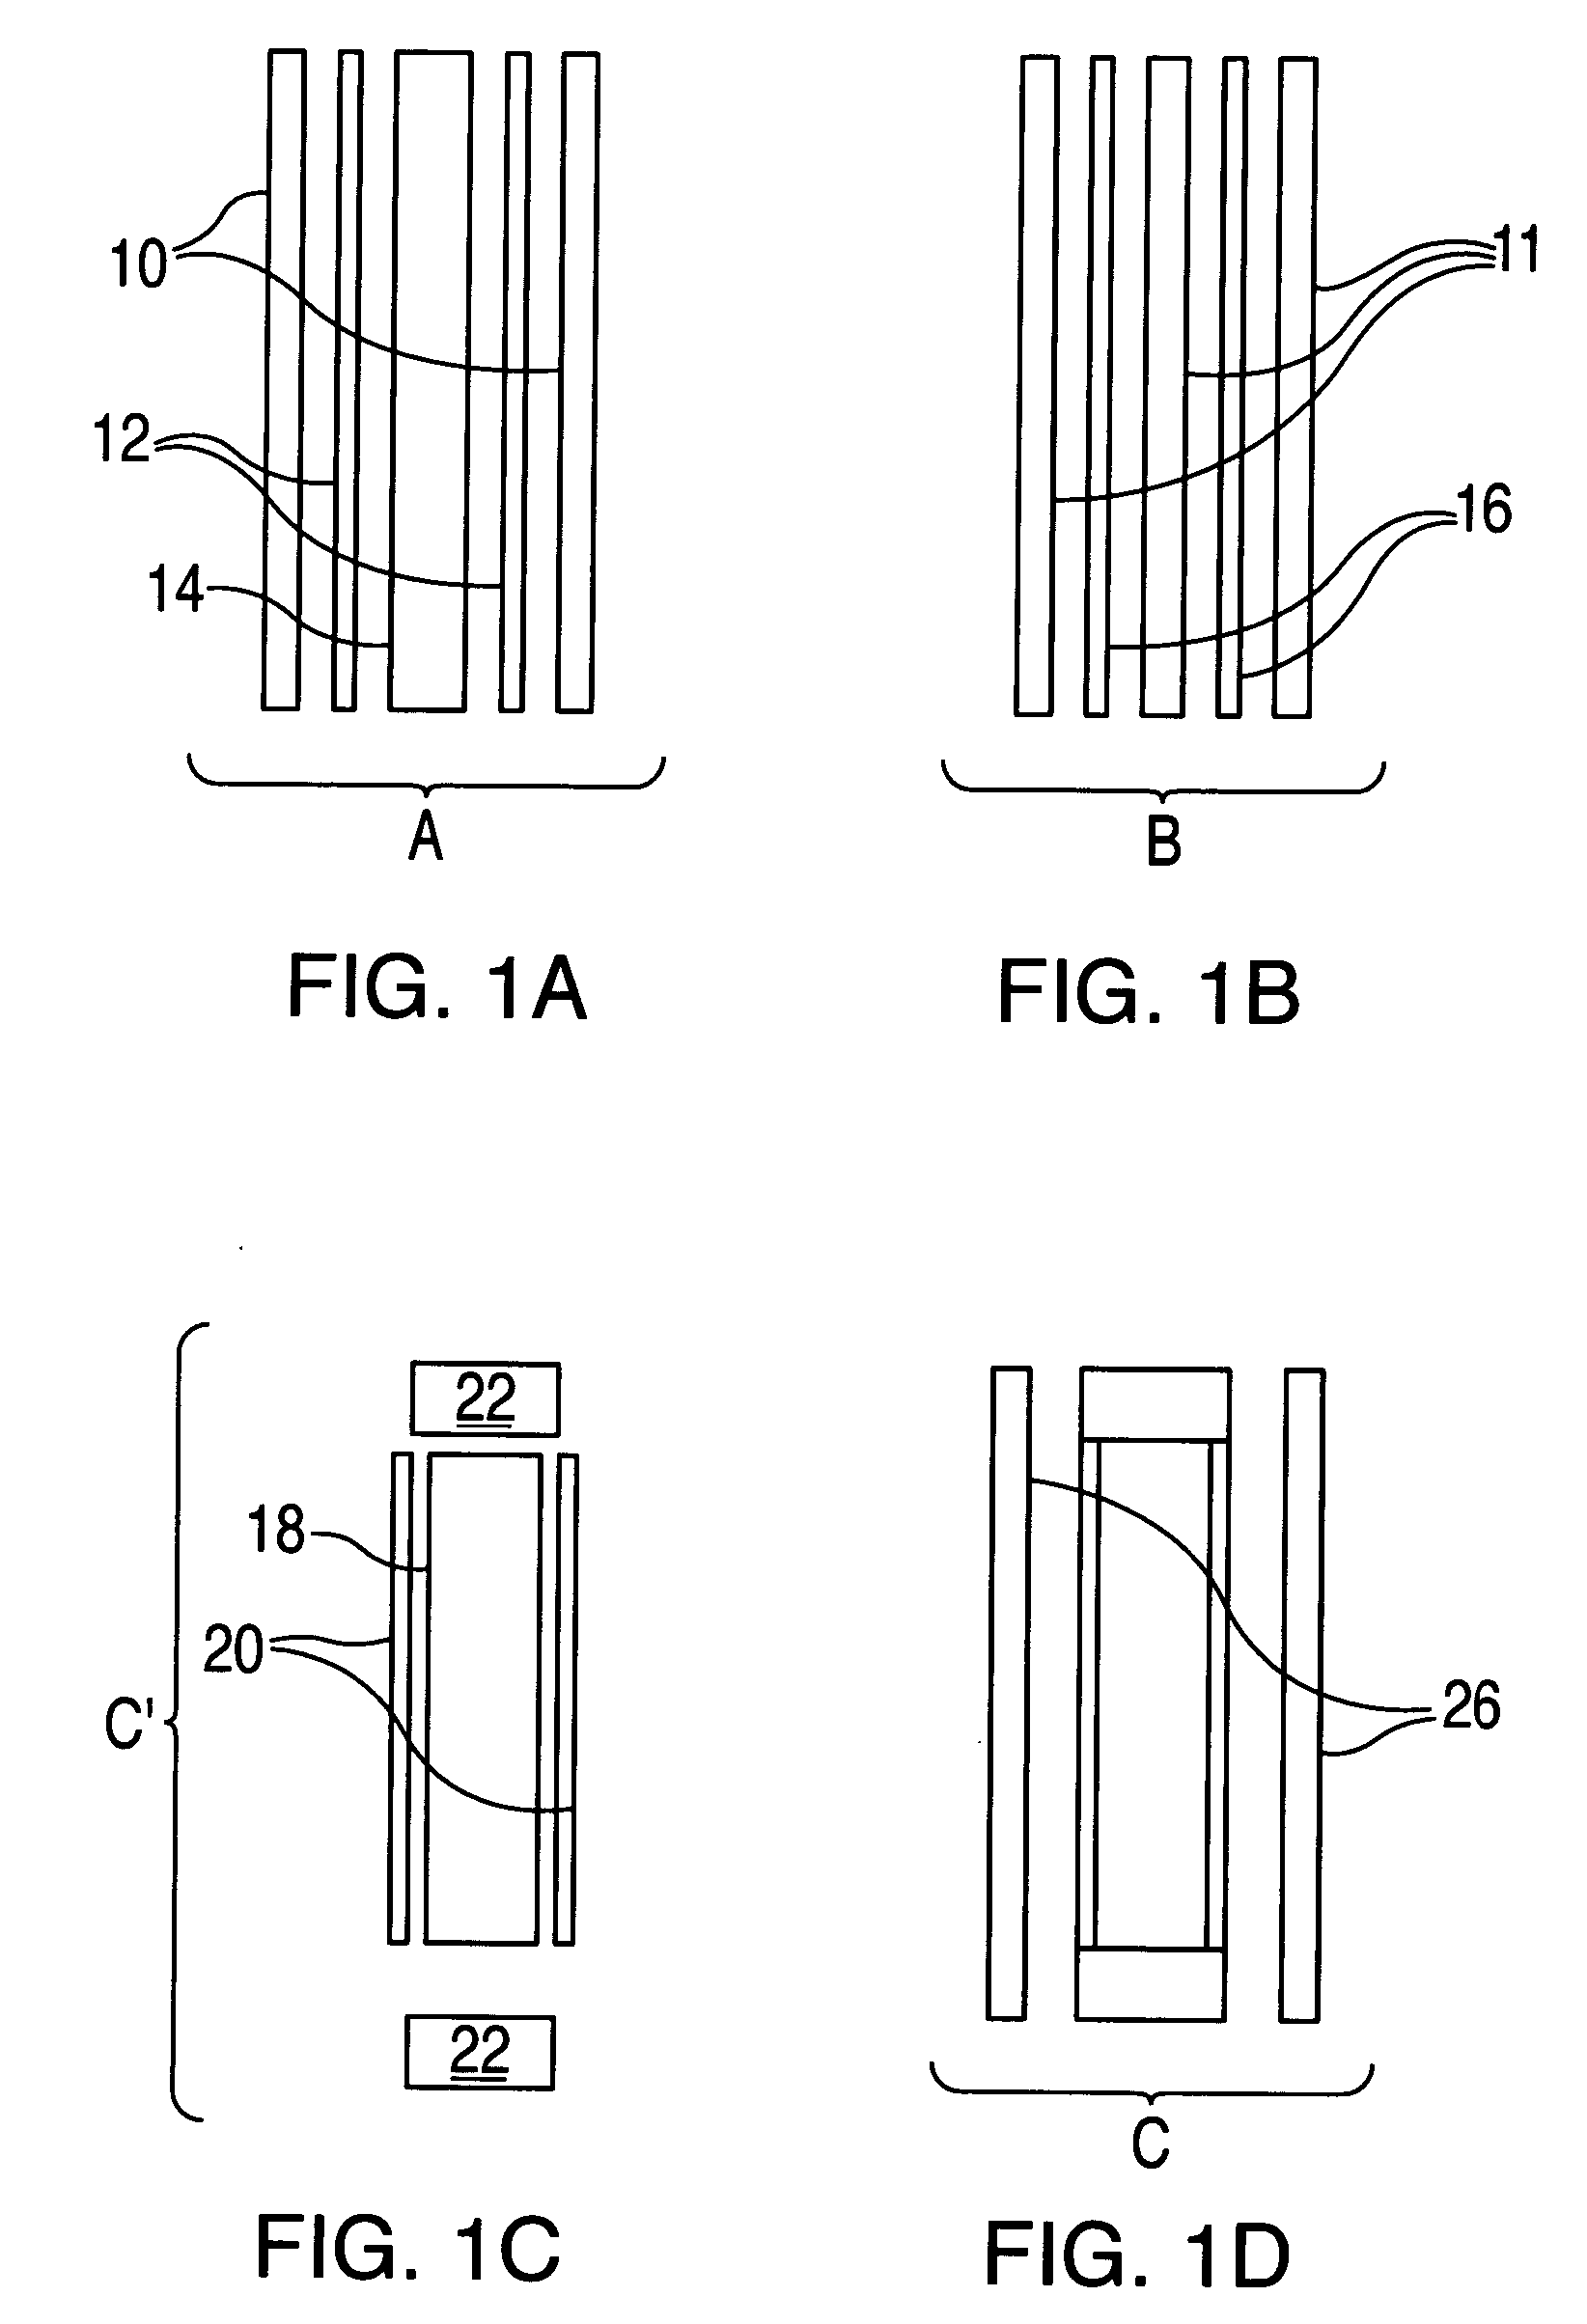 Laminate materials for furniture and furniture pieces incorporating the same